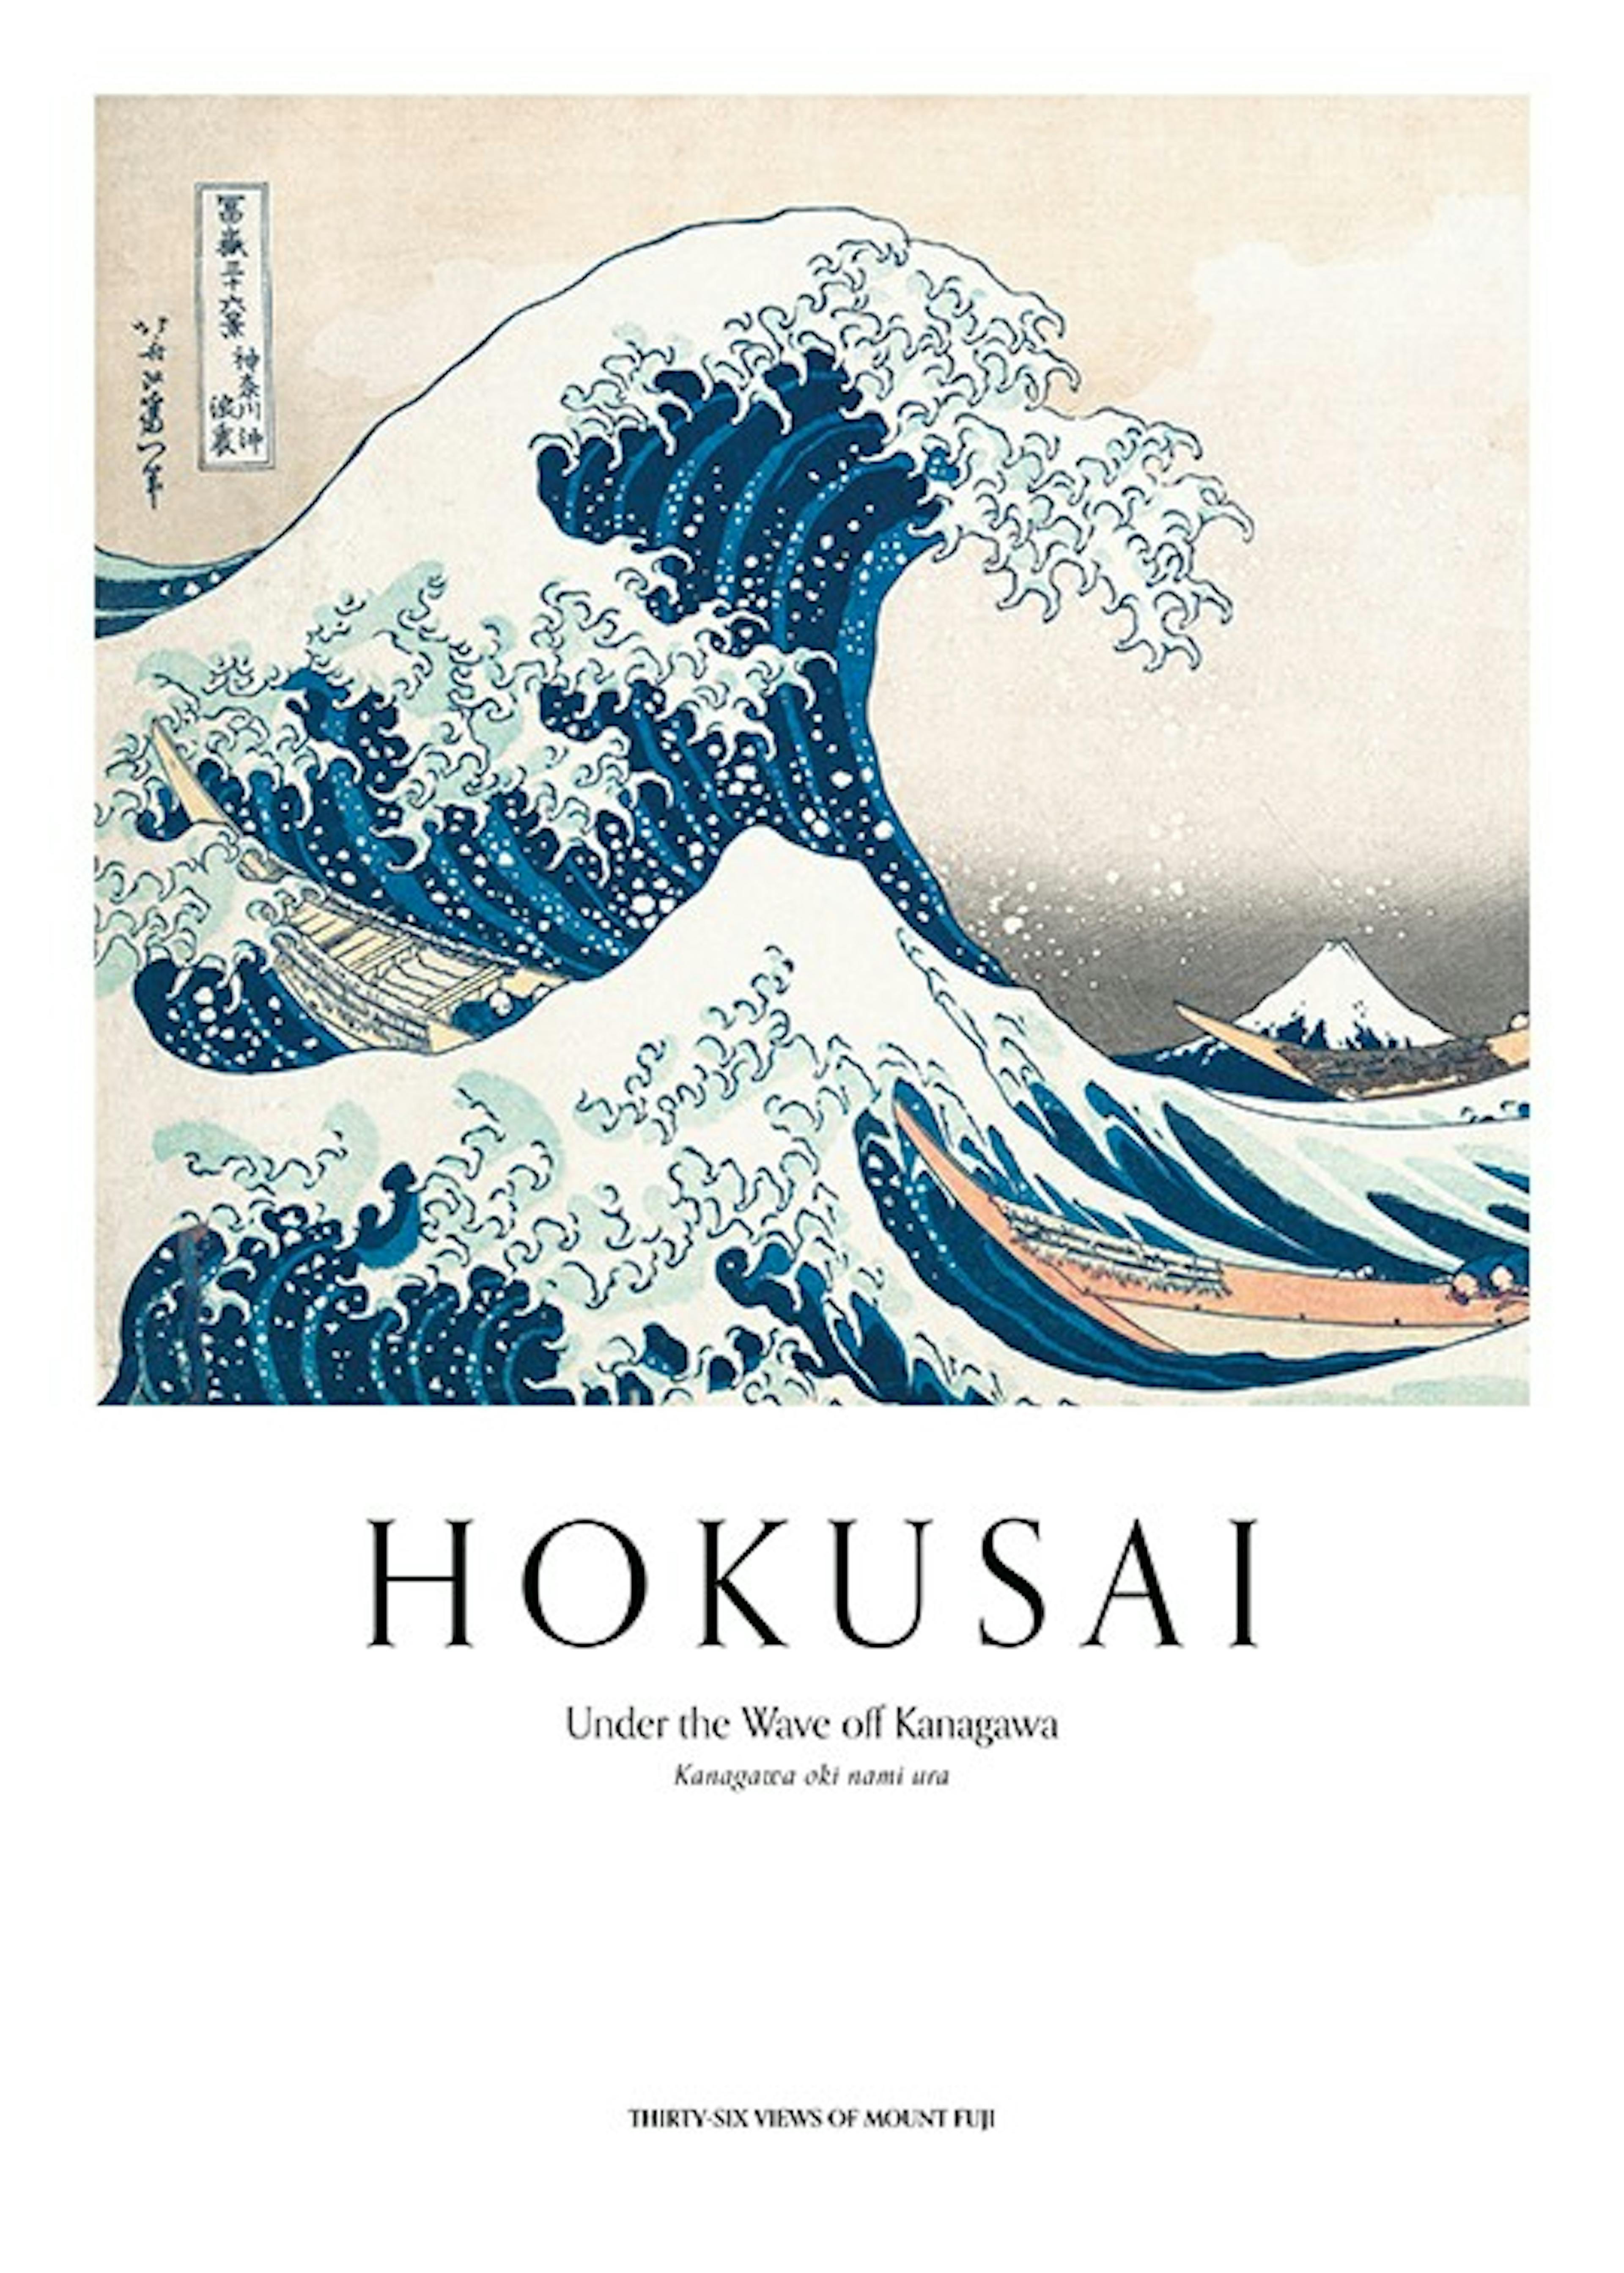 Hokusai - The Great Wave Affiche 0